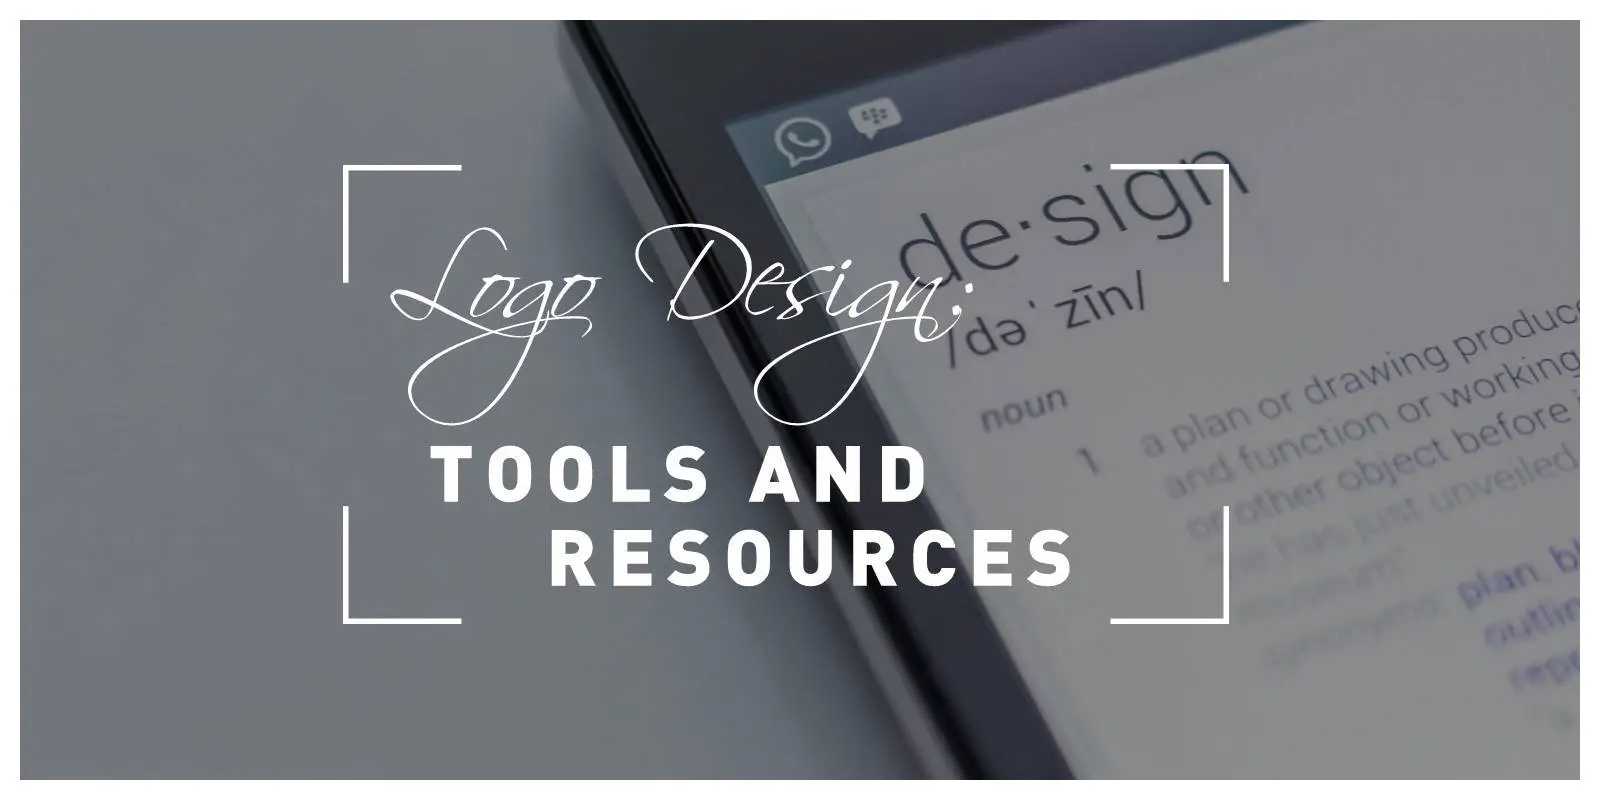 Logo Design Tools / Resources to Suit All Budgets